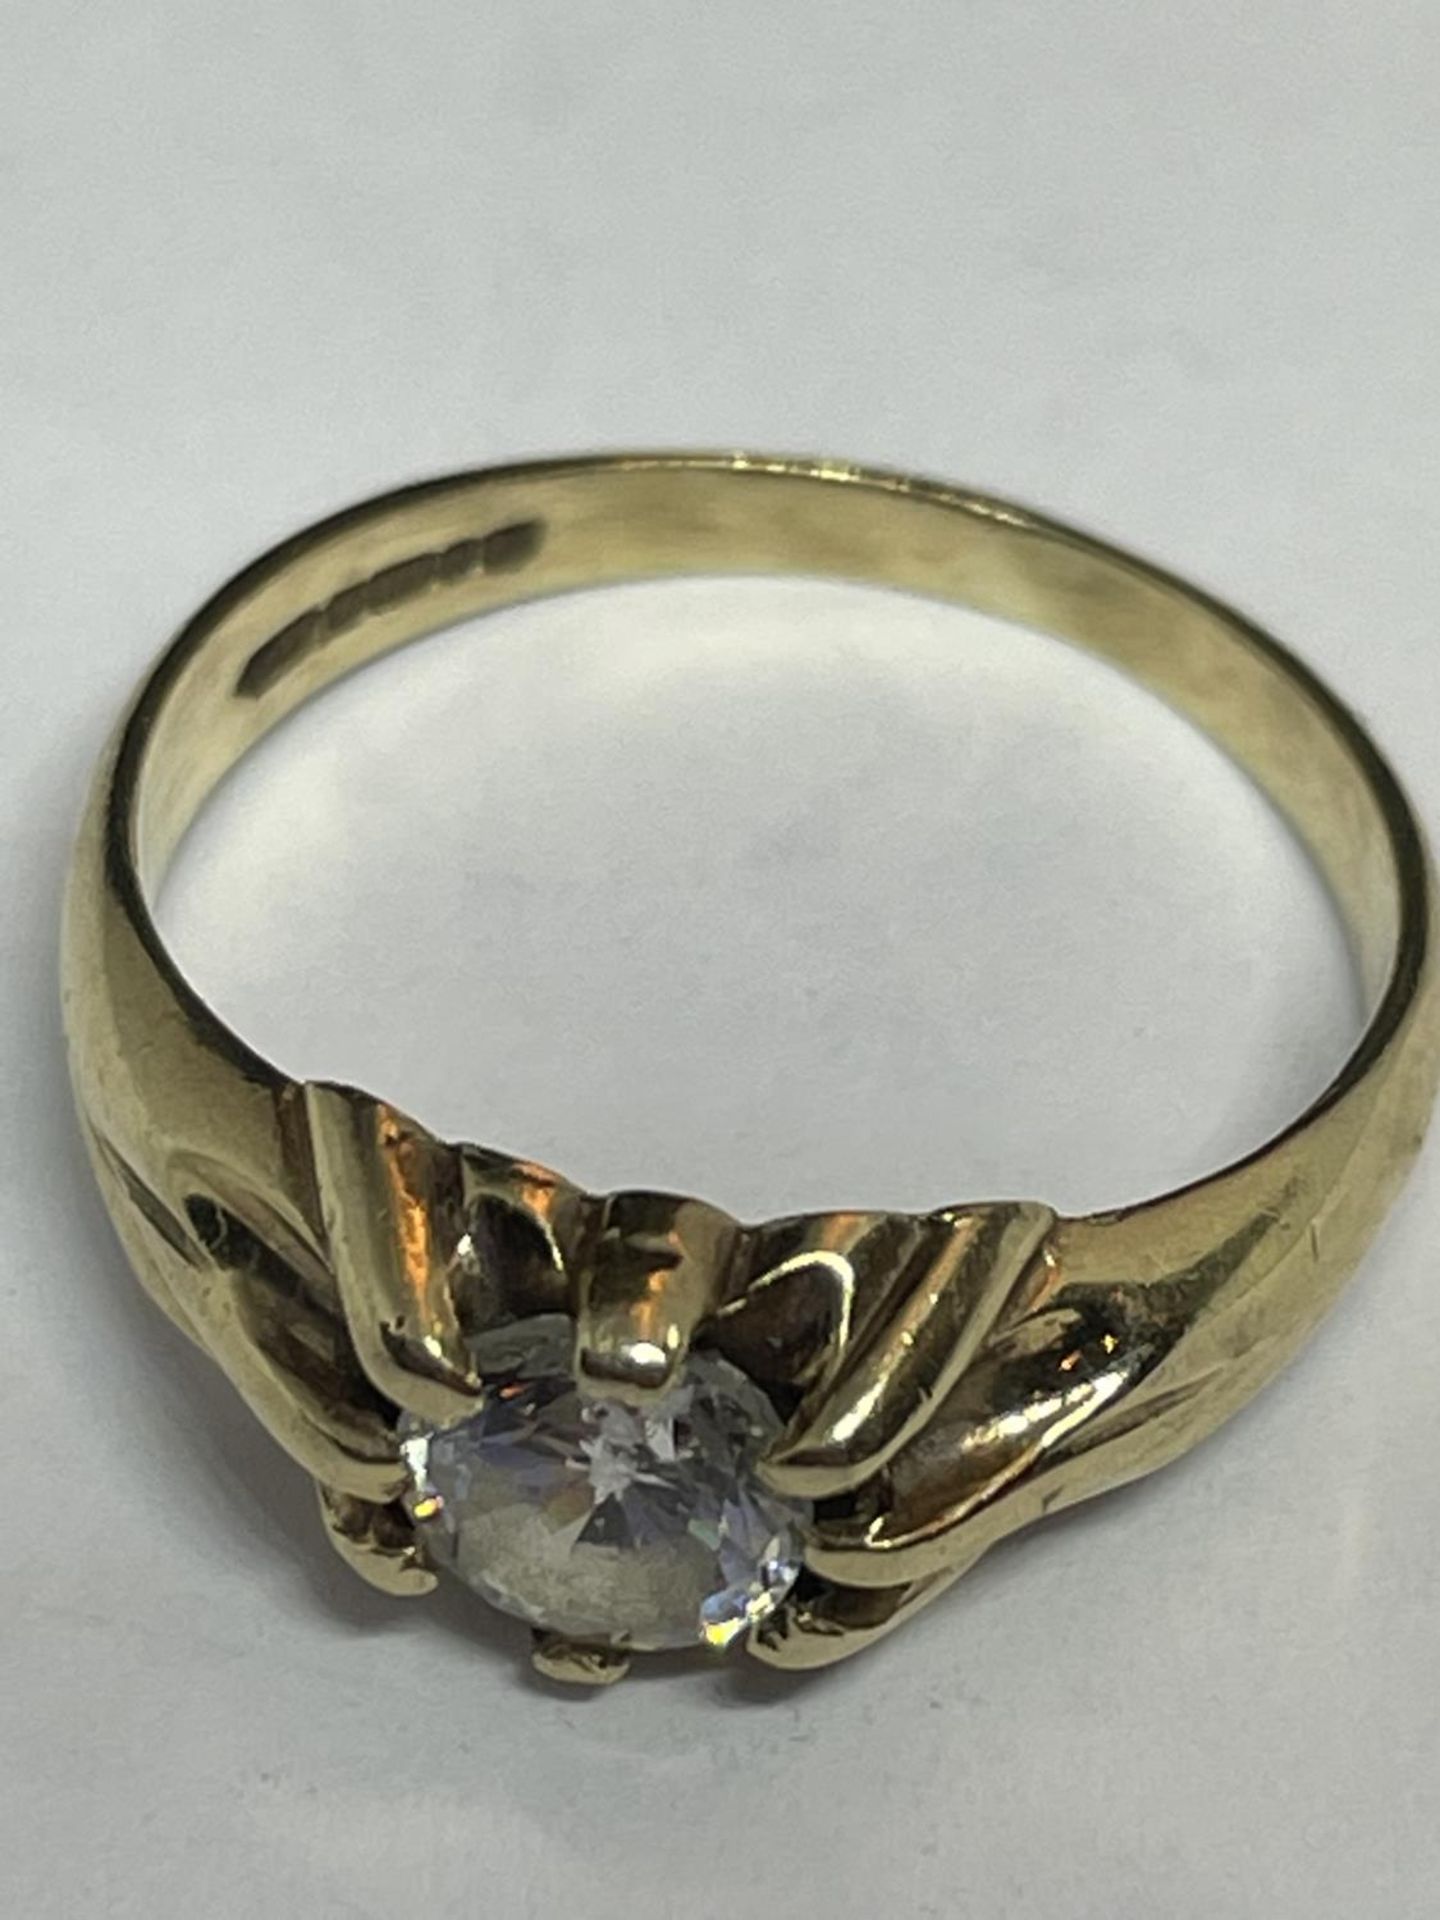 A 9 CARAT GOLD RING WITH A SOLITAIRE CUBIC ZIRCONIA STONE SIZE K - Image 8 of 8